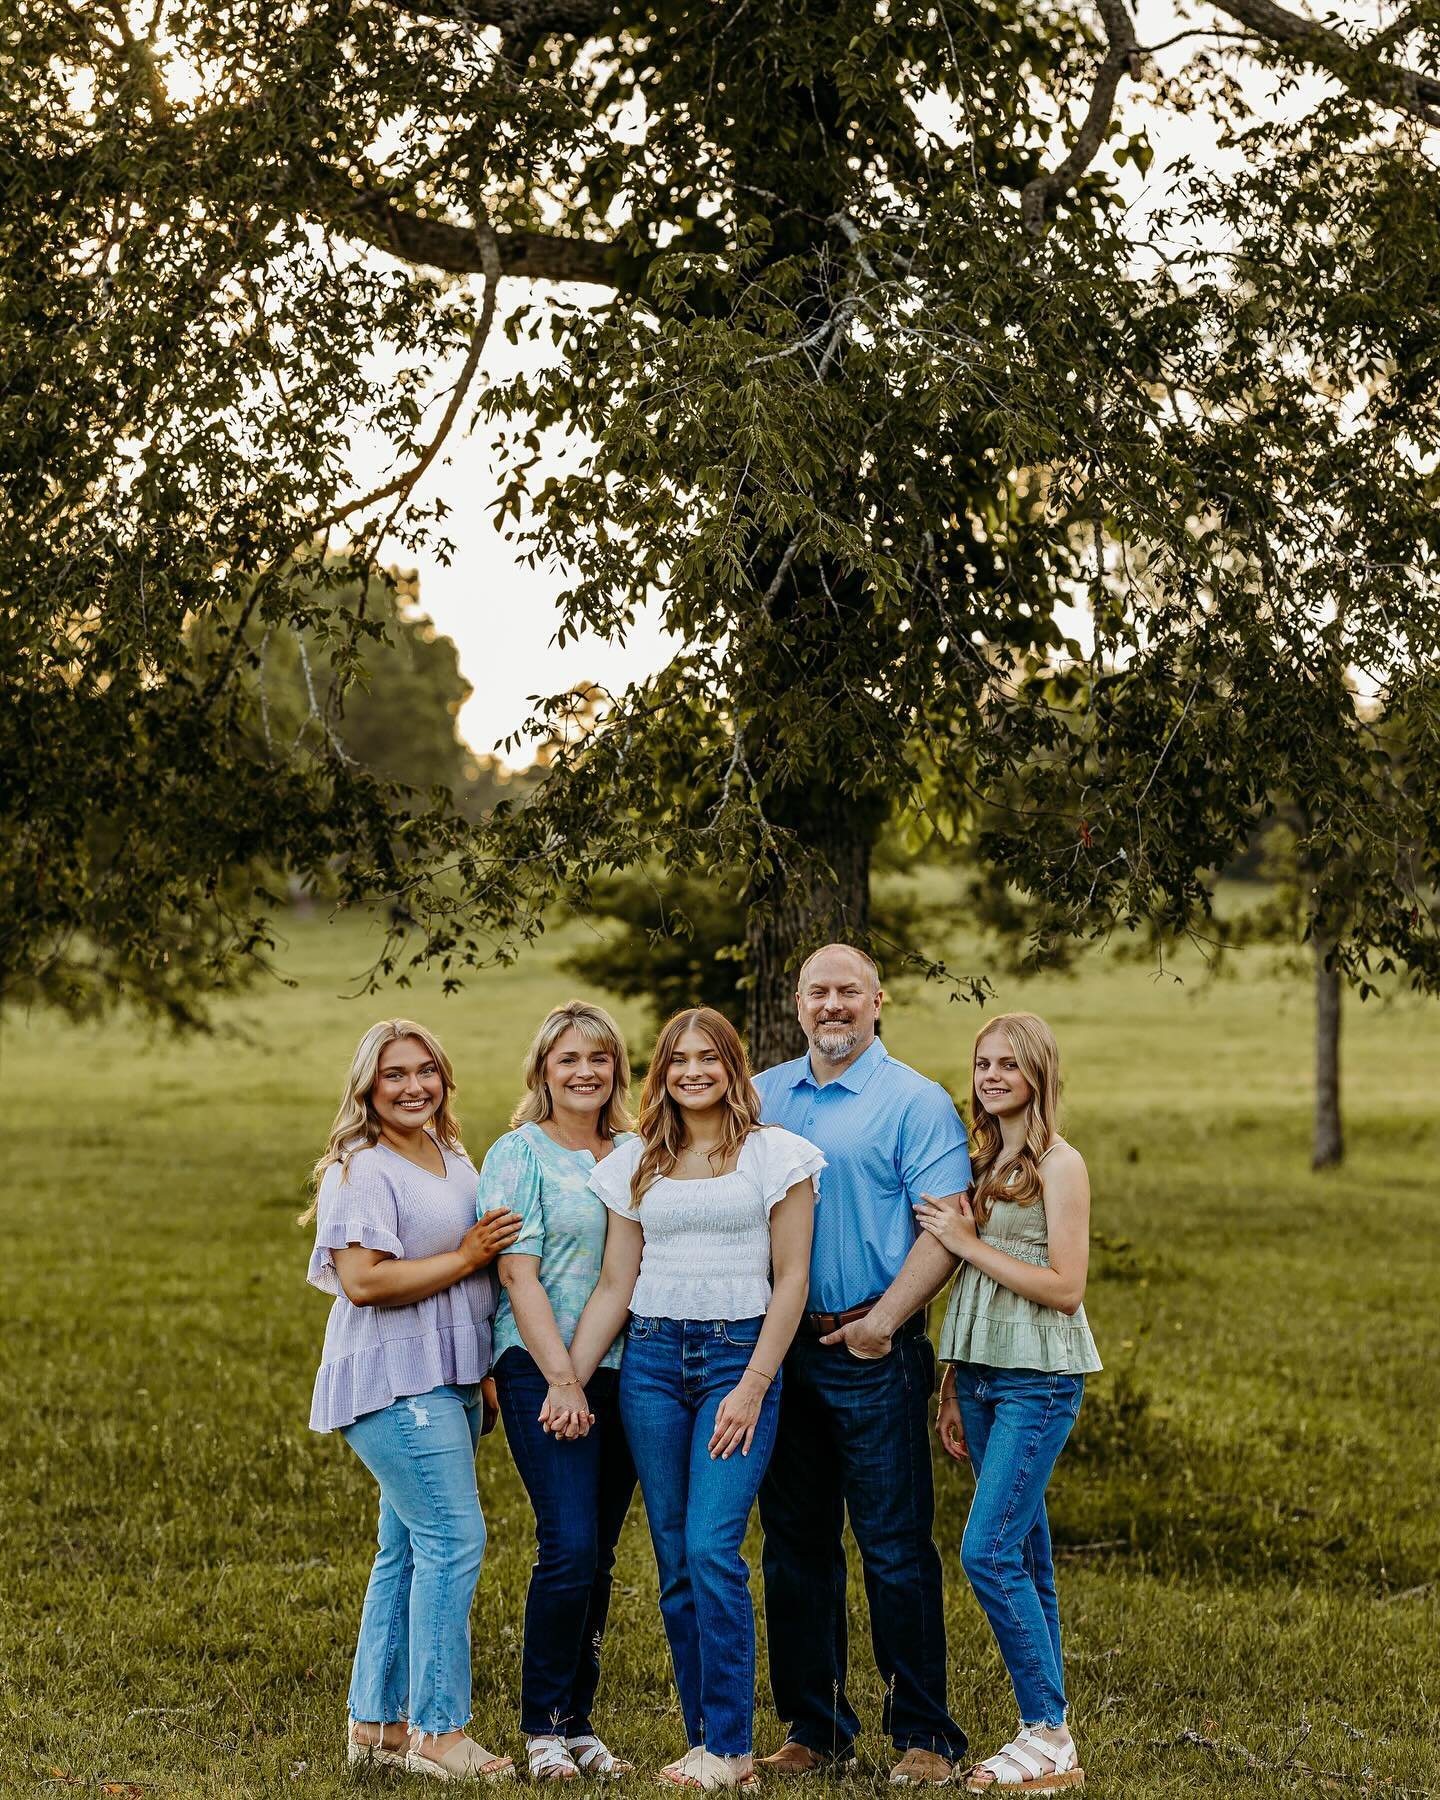 I love getting the opportunity to photograph the gorgeous Cheek family!